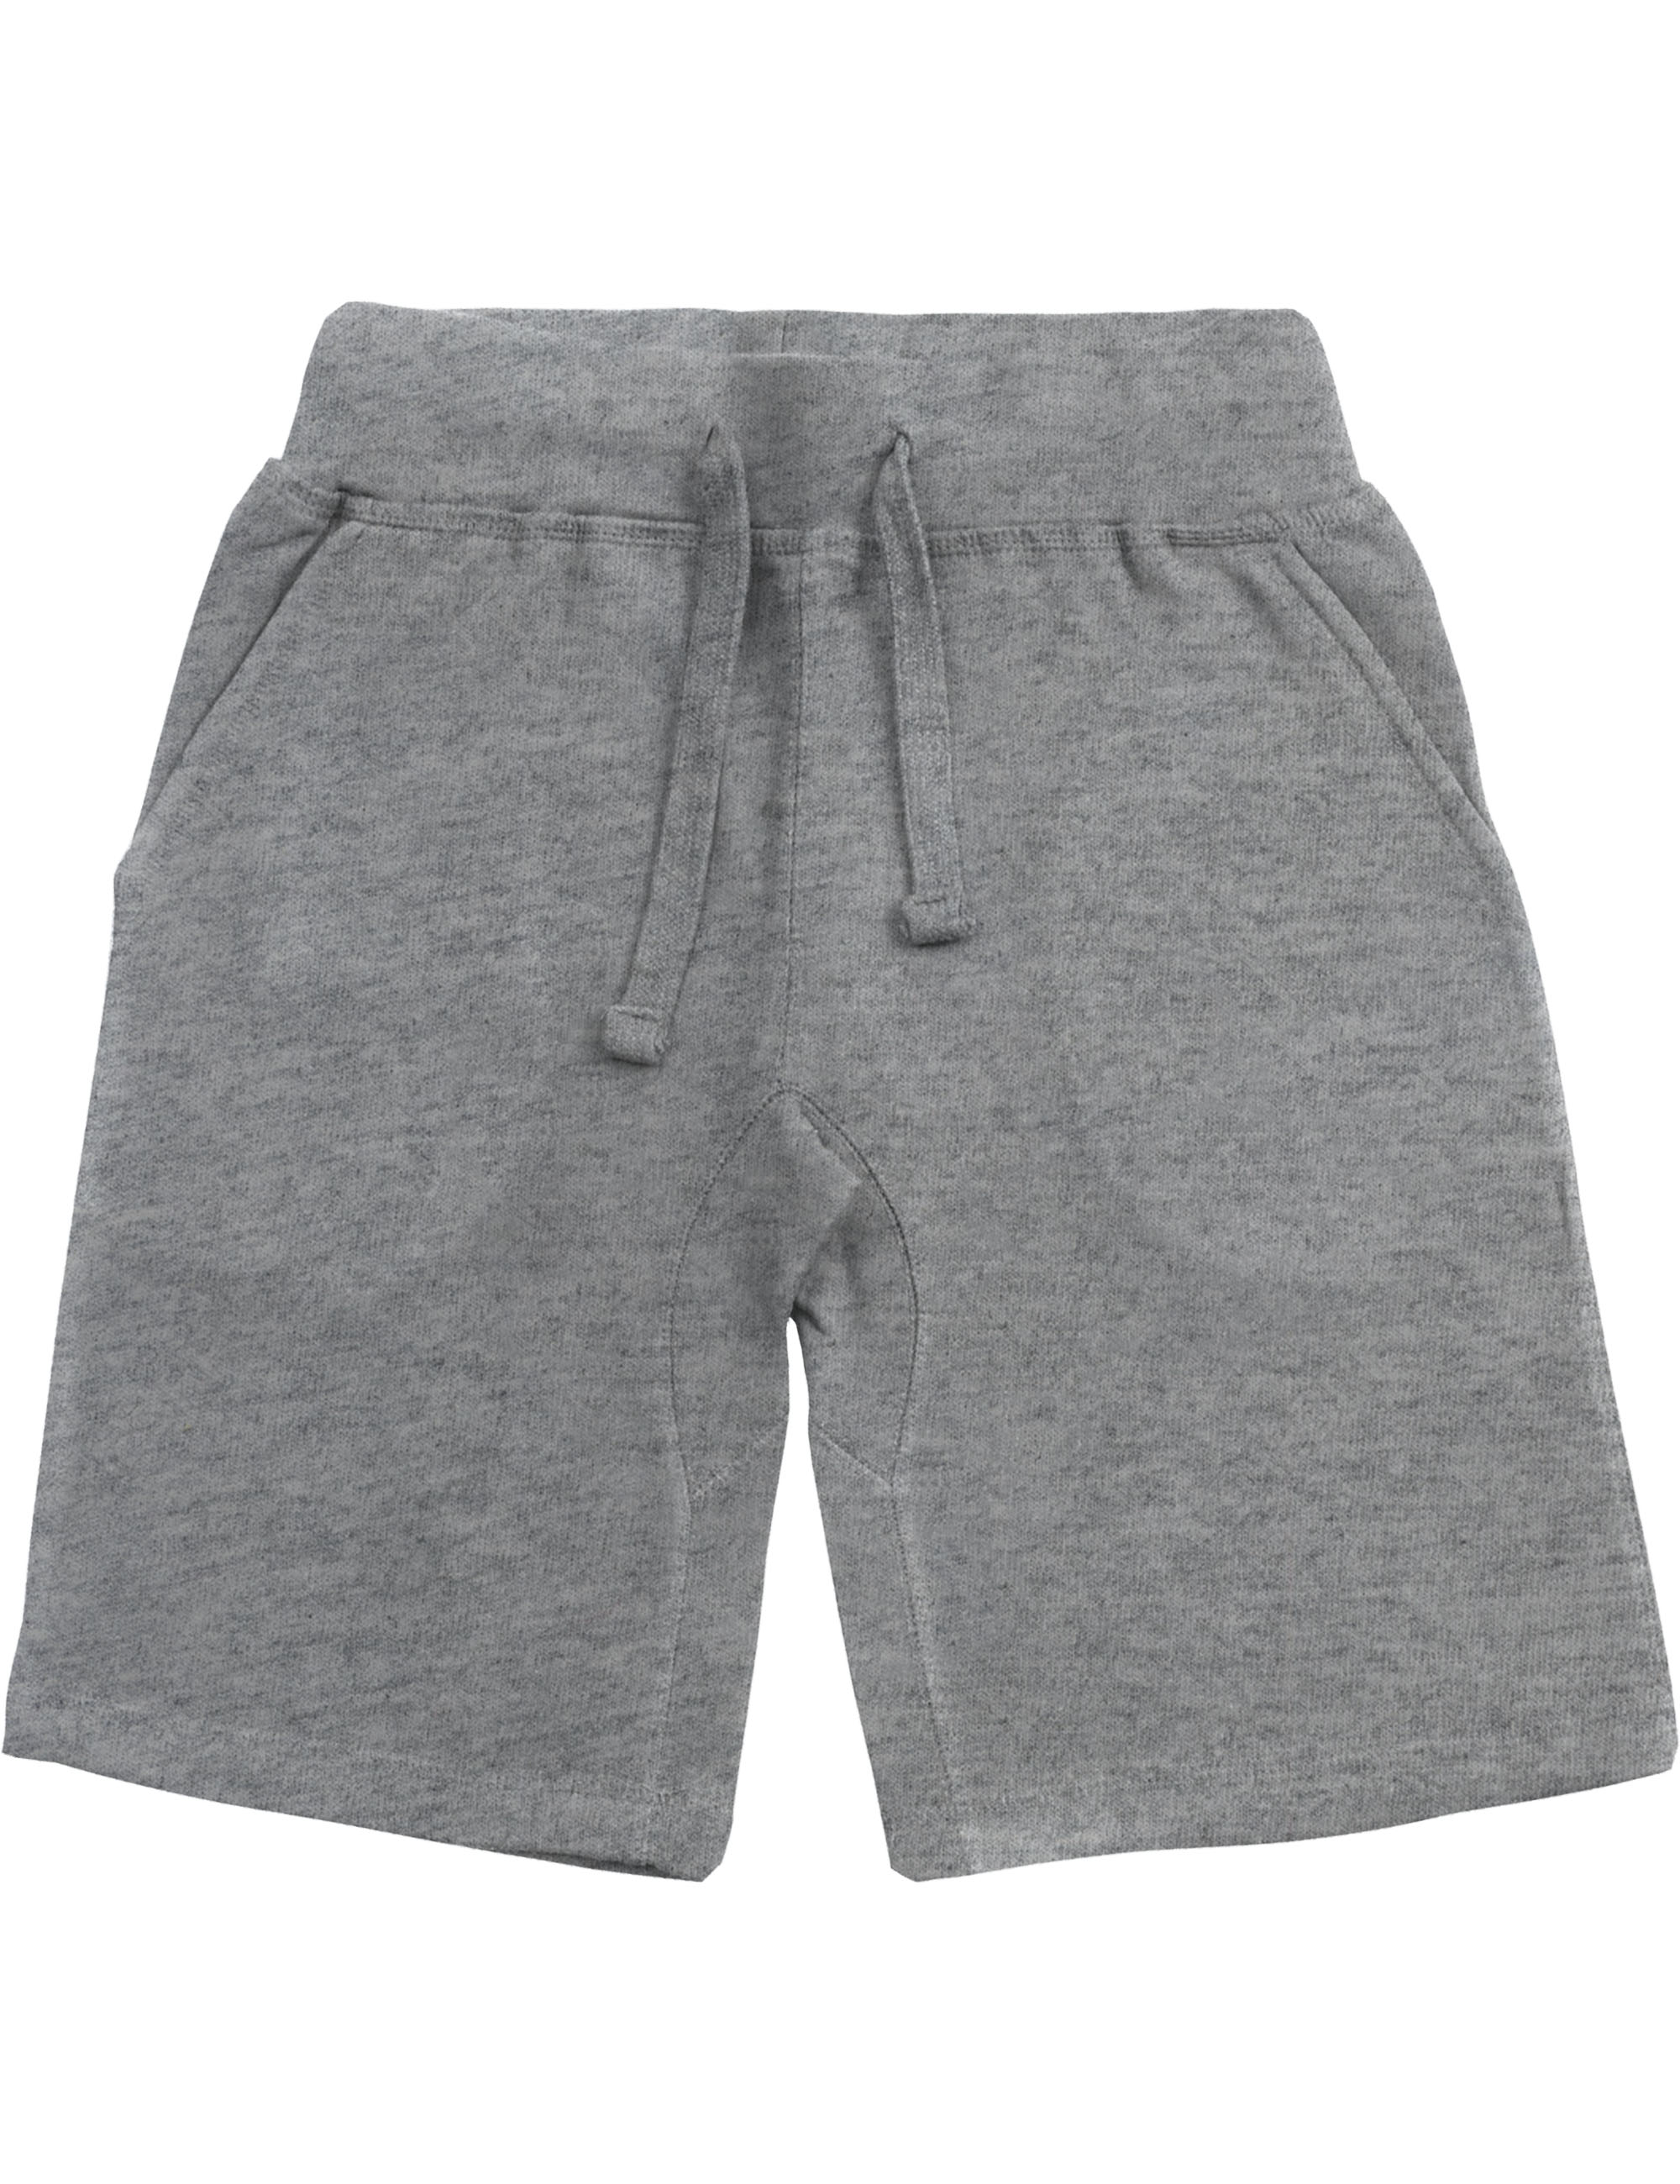 Mens Shorts Mamba-Basketball-Player Loungewear Casual Classic Fit for Men Lounge Shorts